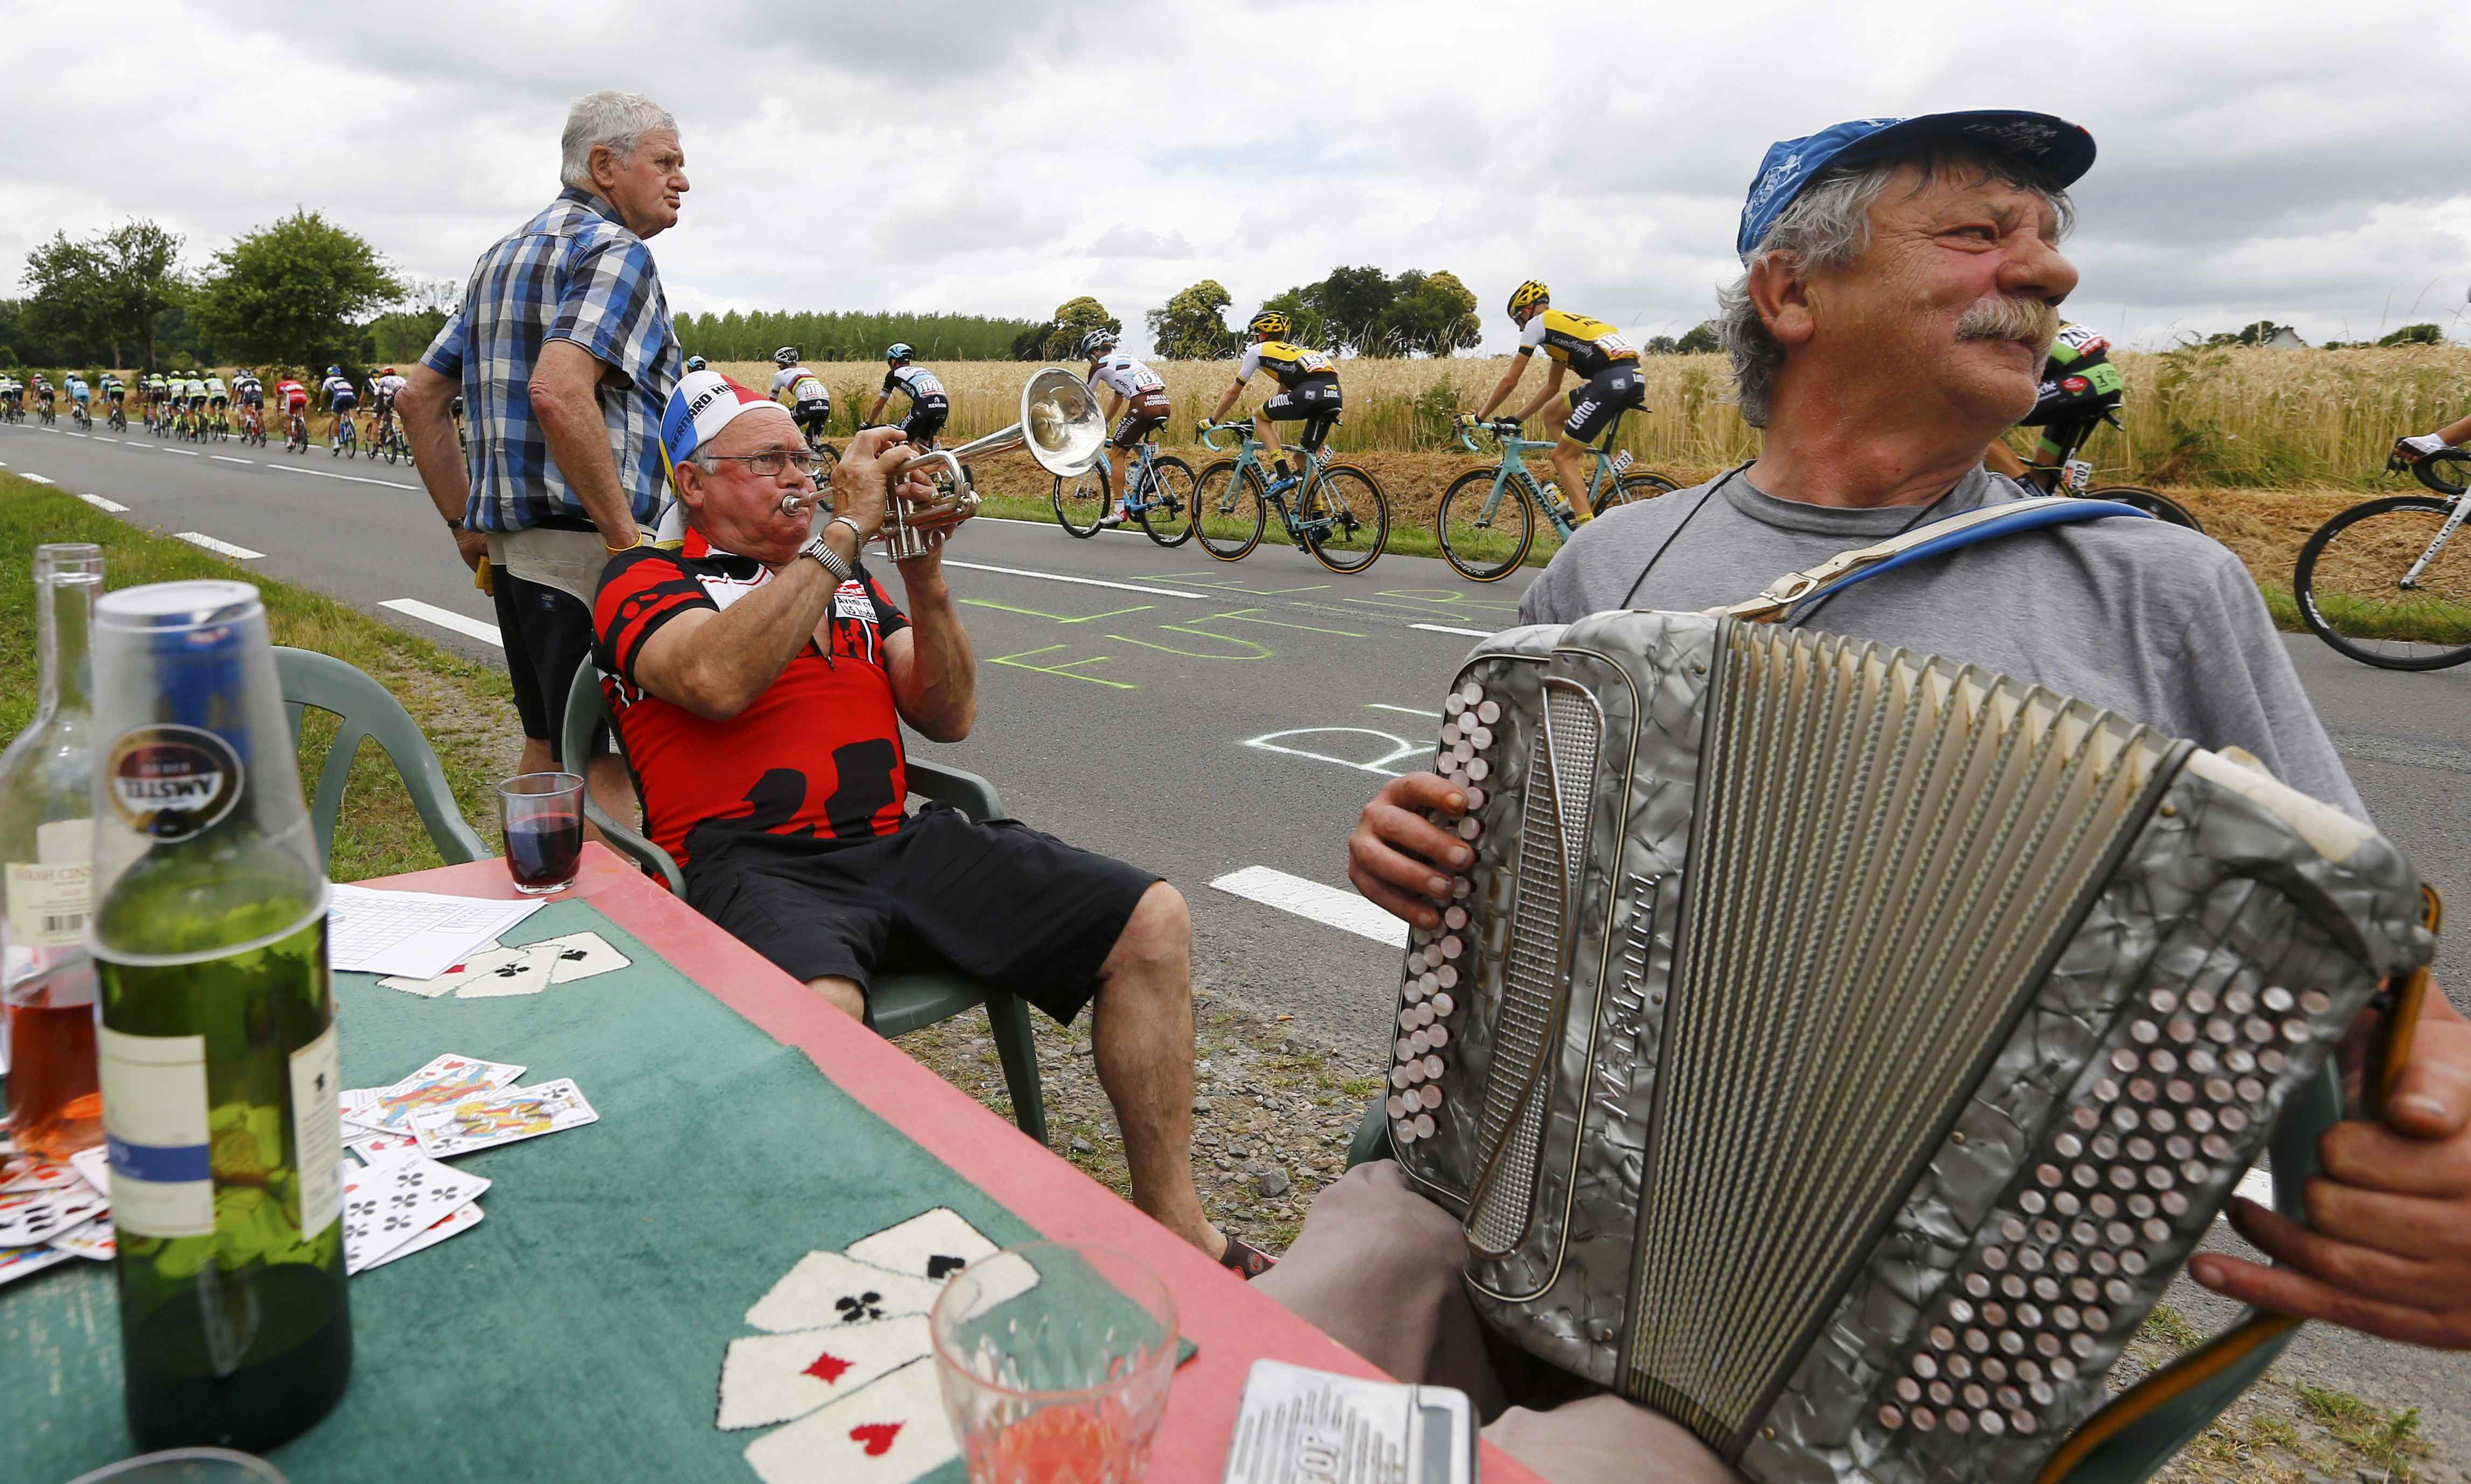 Cycling supporters play instruments as riders pass by during the eighth stage of the race from Rennes to Mur-de-Bretagne, France on July 11, 2015.